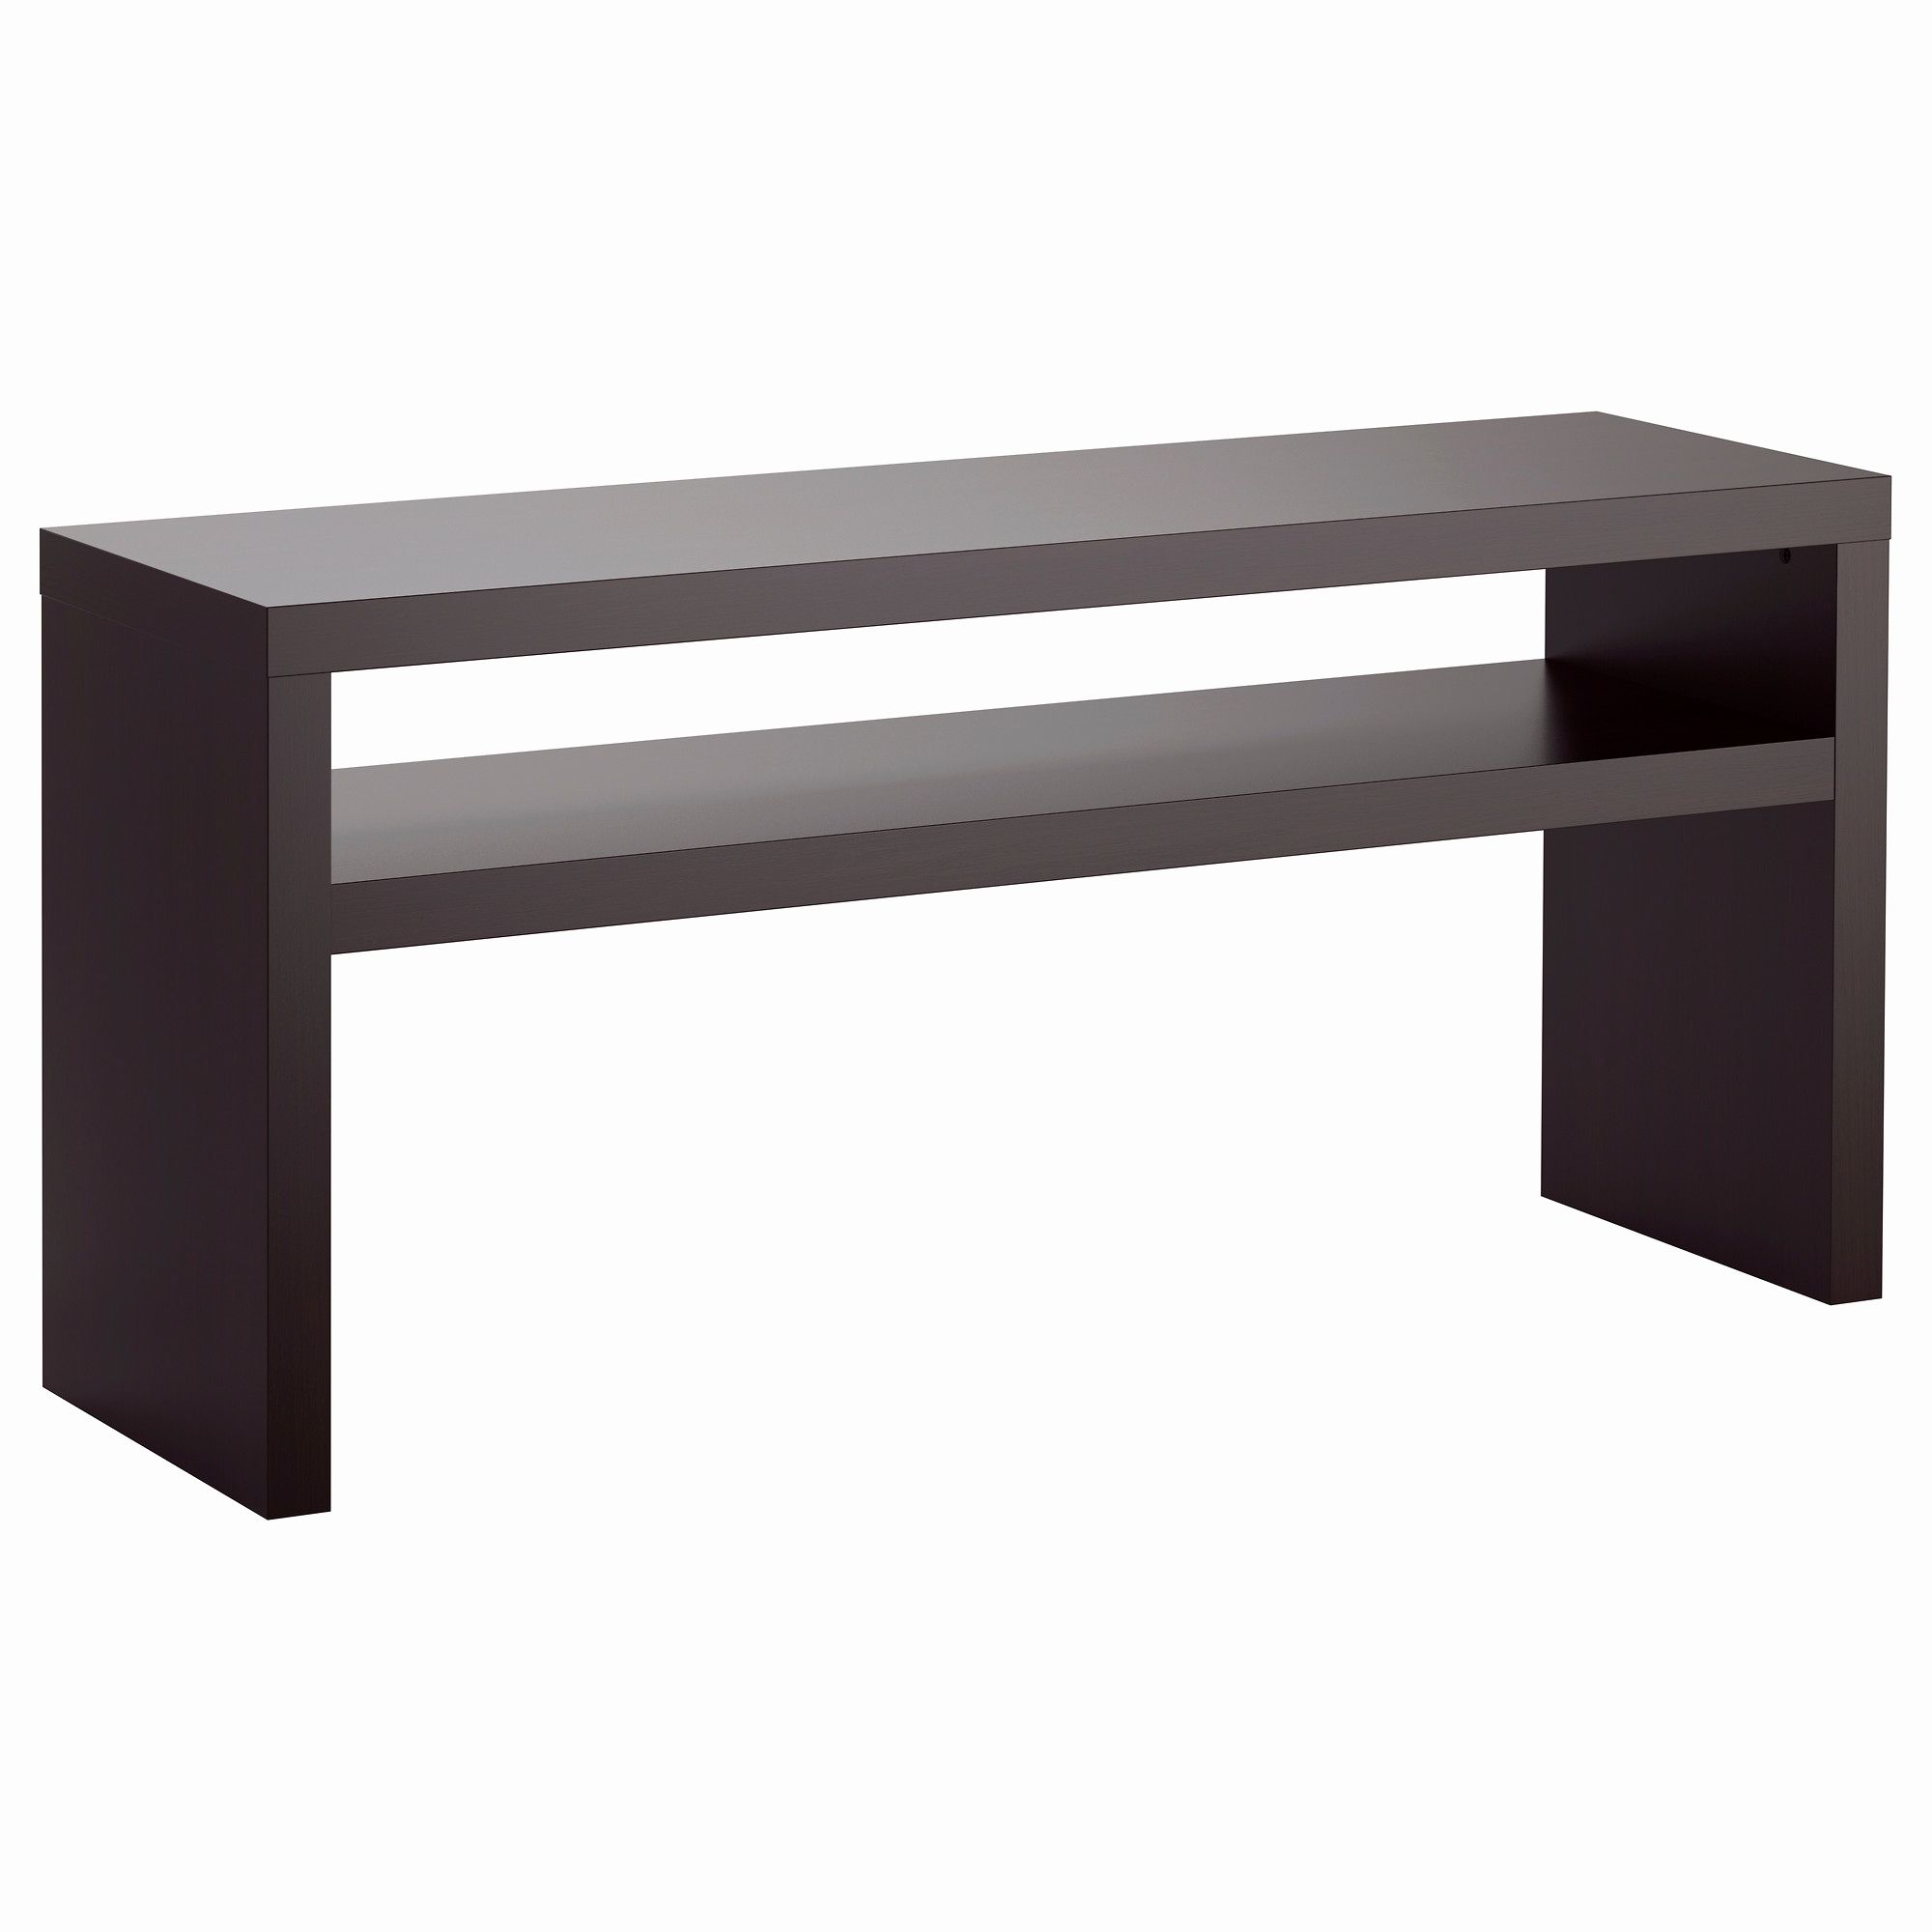 Widely Used Silviano 84 Inch Console Tables For 84 Inch Sofa Table Outstanding Console Tables Ikea Console Table (View 1 of 20)